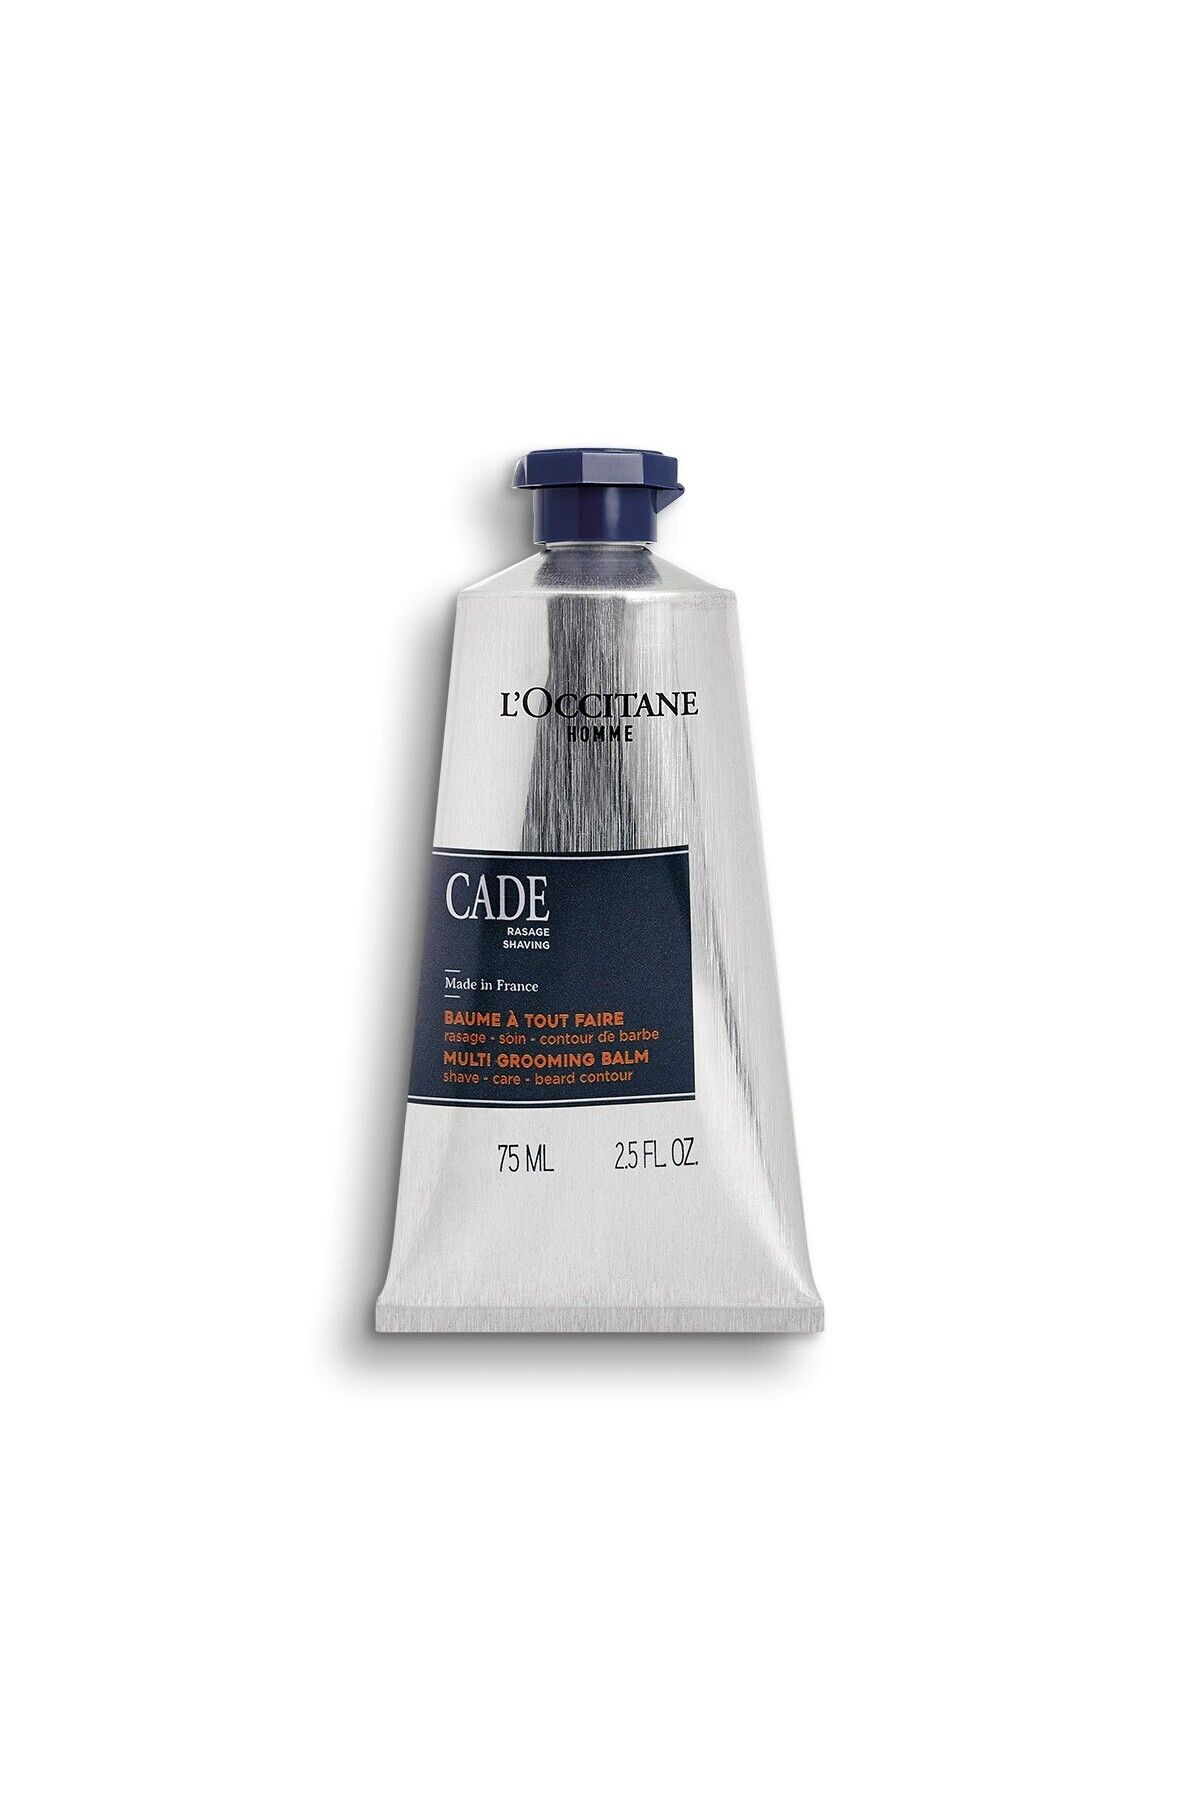 L'Occitane CADE MULTİ GROOMİNG BALM - CADE SKİN BRİGHTENİNG SHAVİNG AND AFTER SHAVE BALM - 75 ML DEMBA3019